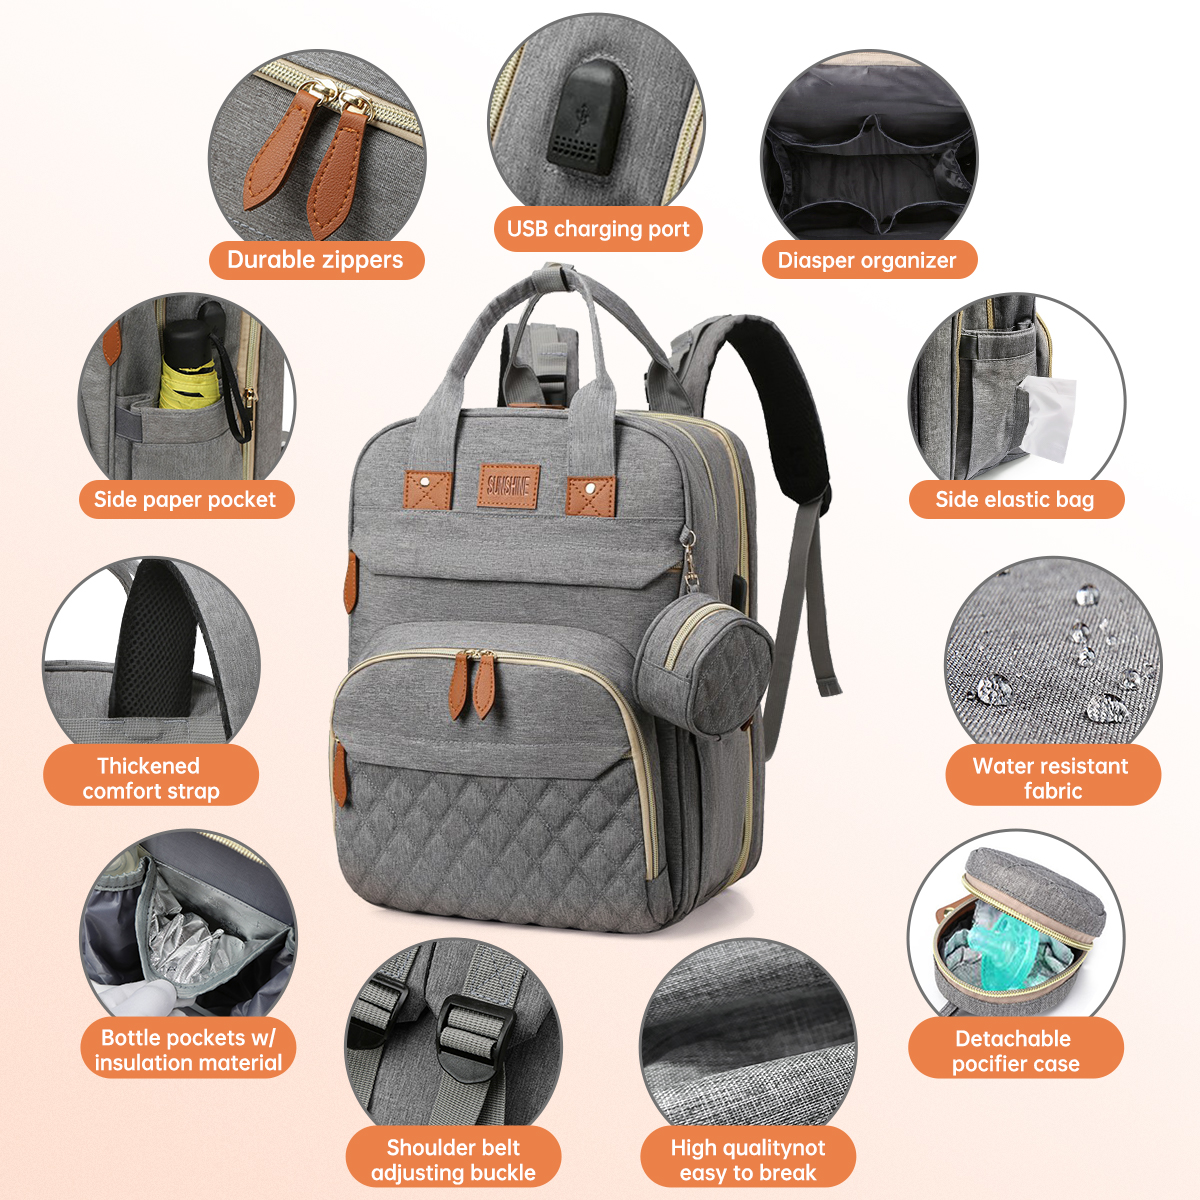 Diaper Bag Backpack, Multifunction Baby Diaper Bag with Changing Station, Large Capacity Waterproof Travel Backpack w/ Pacifier Case & USB Charging, Baby Stuff Organizer, Unisex Shower Gifts(Grey) - image 3 of 7